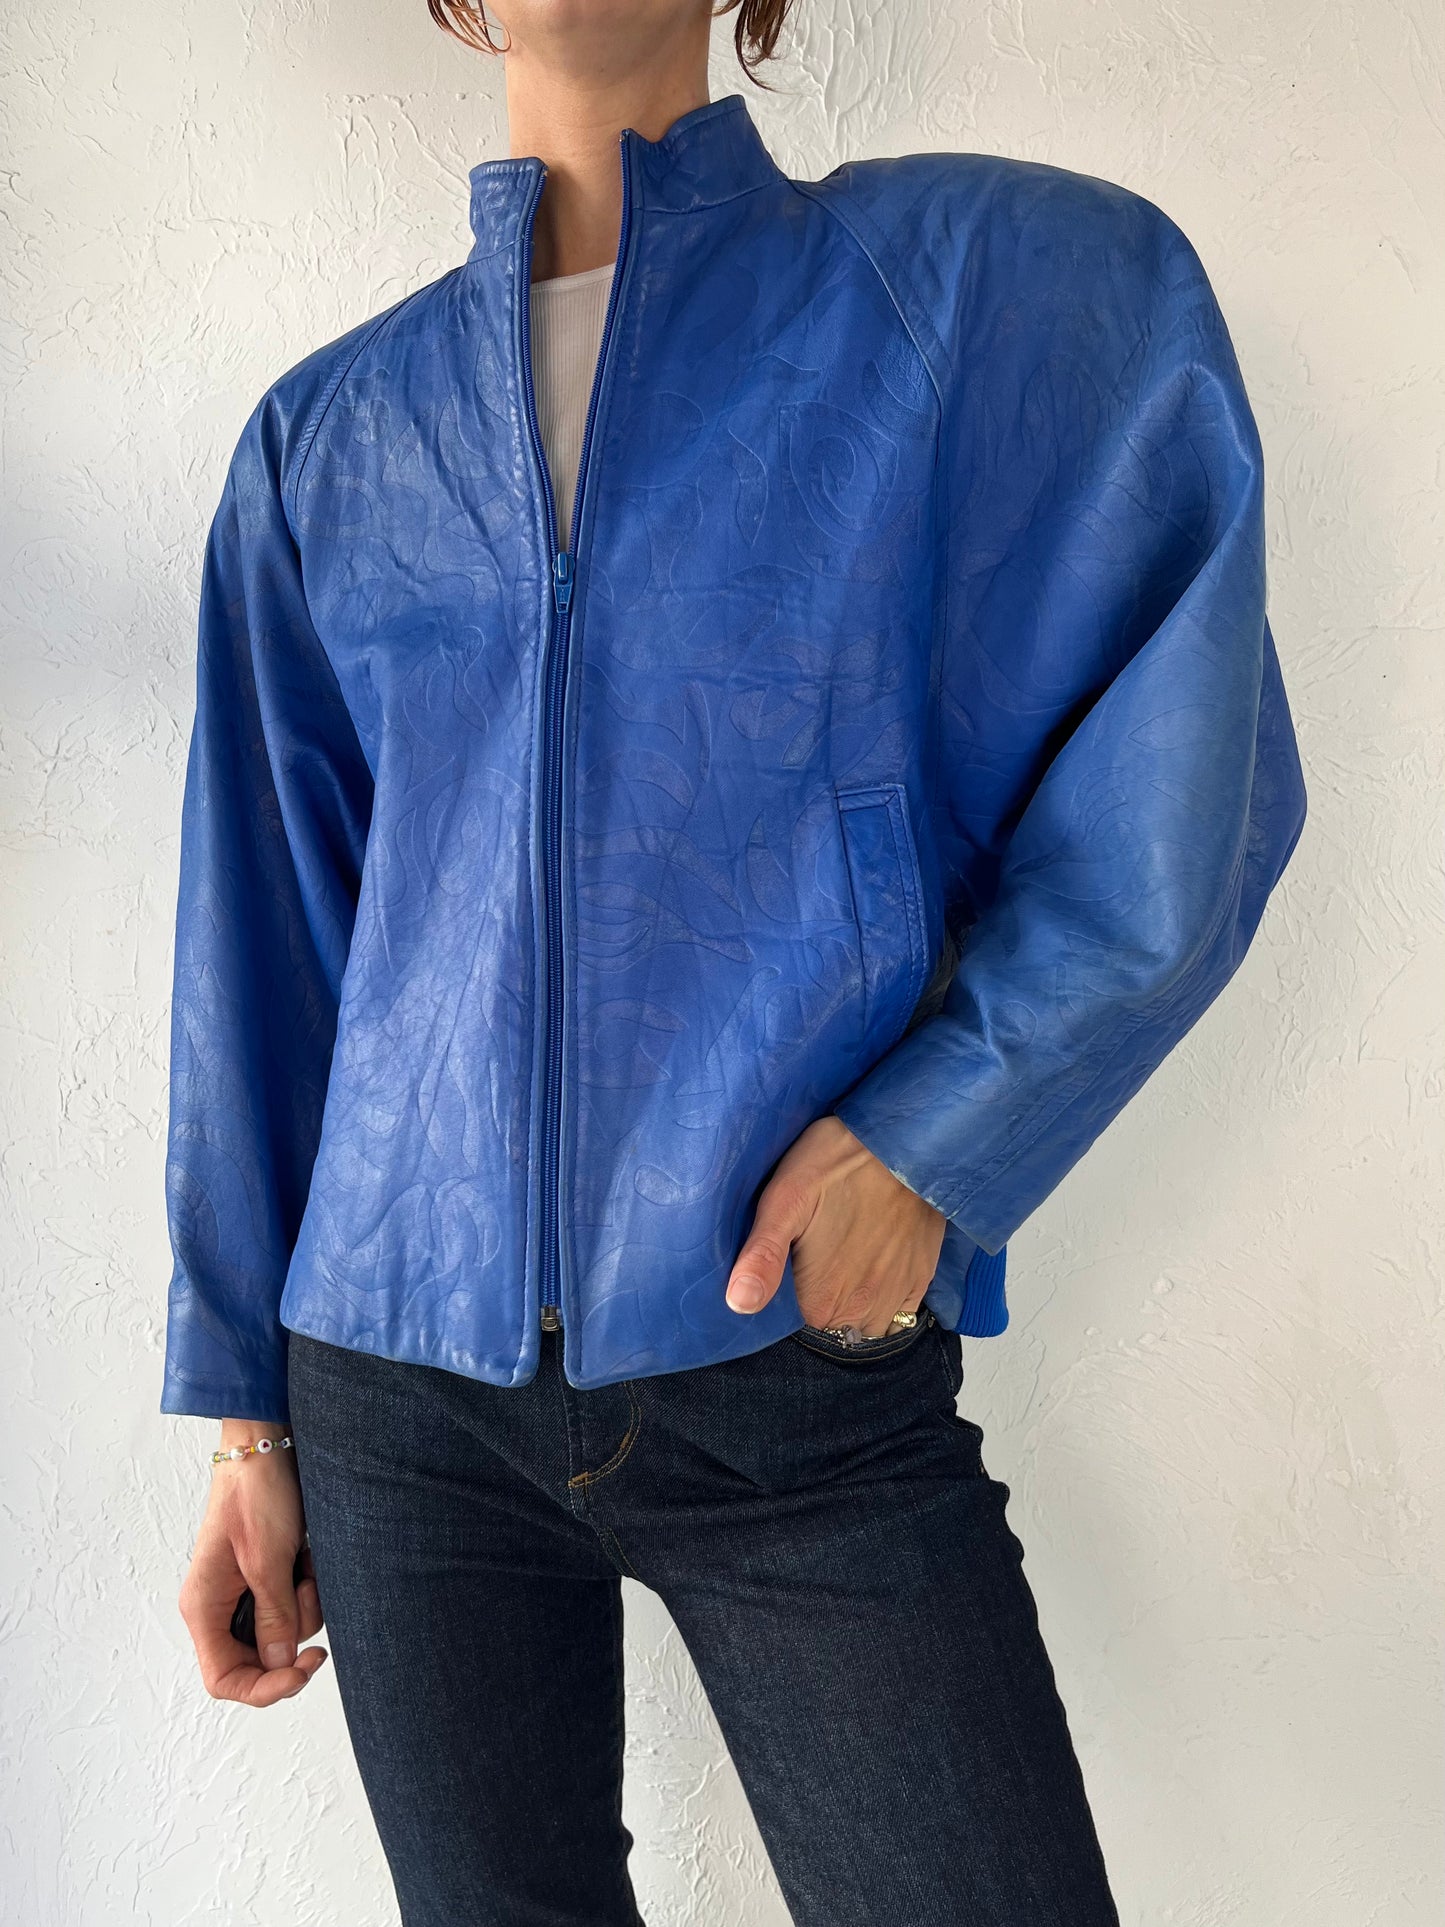 80s 'Danier' Blue Embossed Leather Jacket / Small